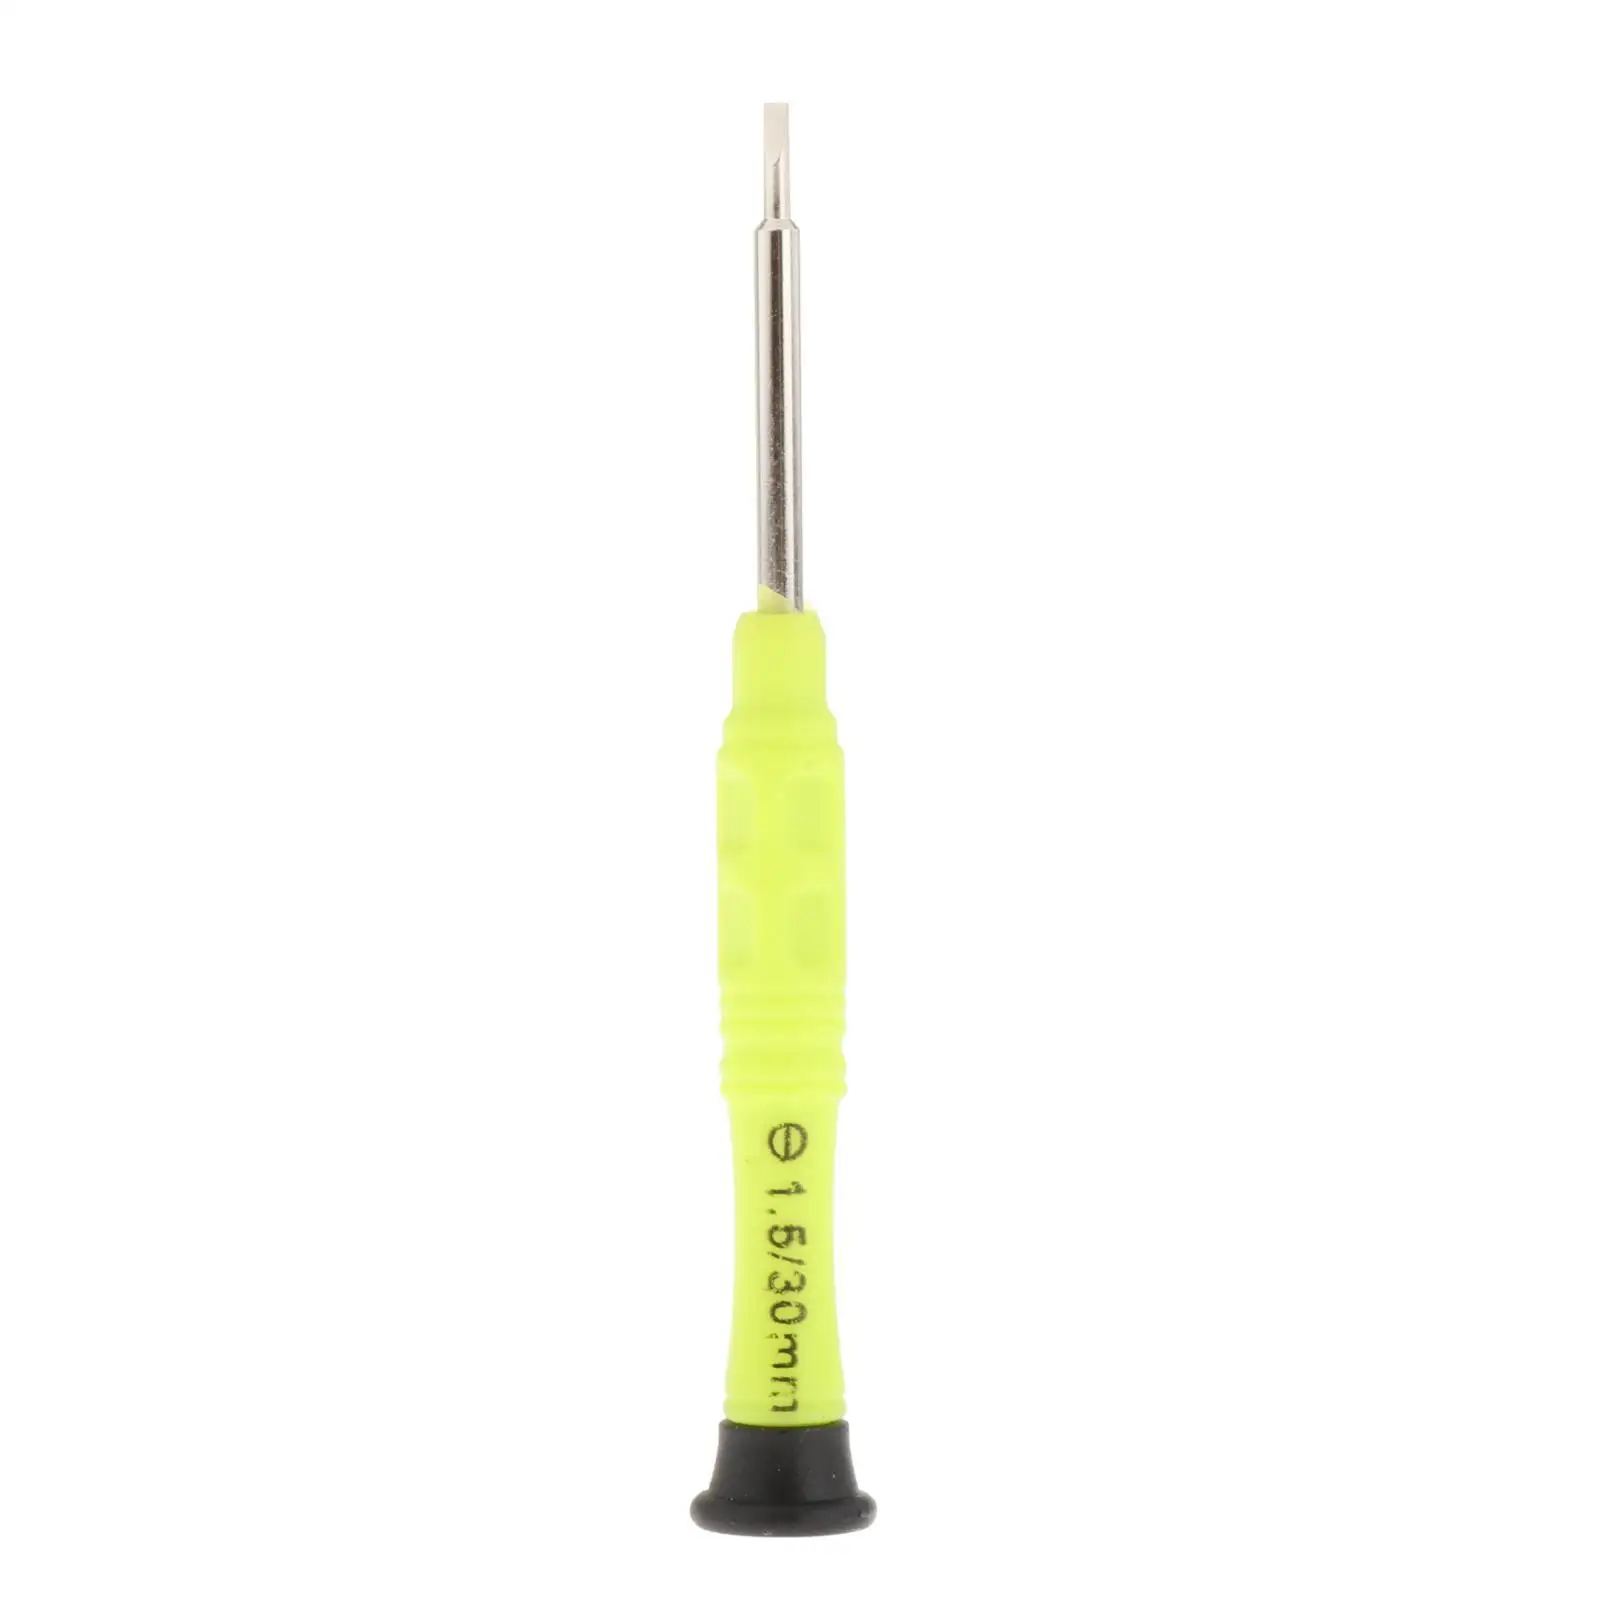 Epee Fencing Screwdriver Easy to Use Repair Tool Professional Hand Tool for